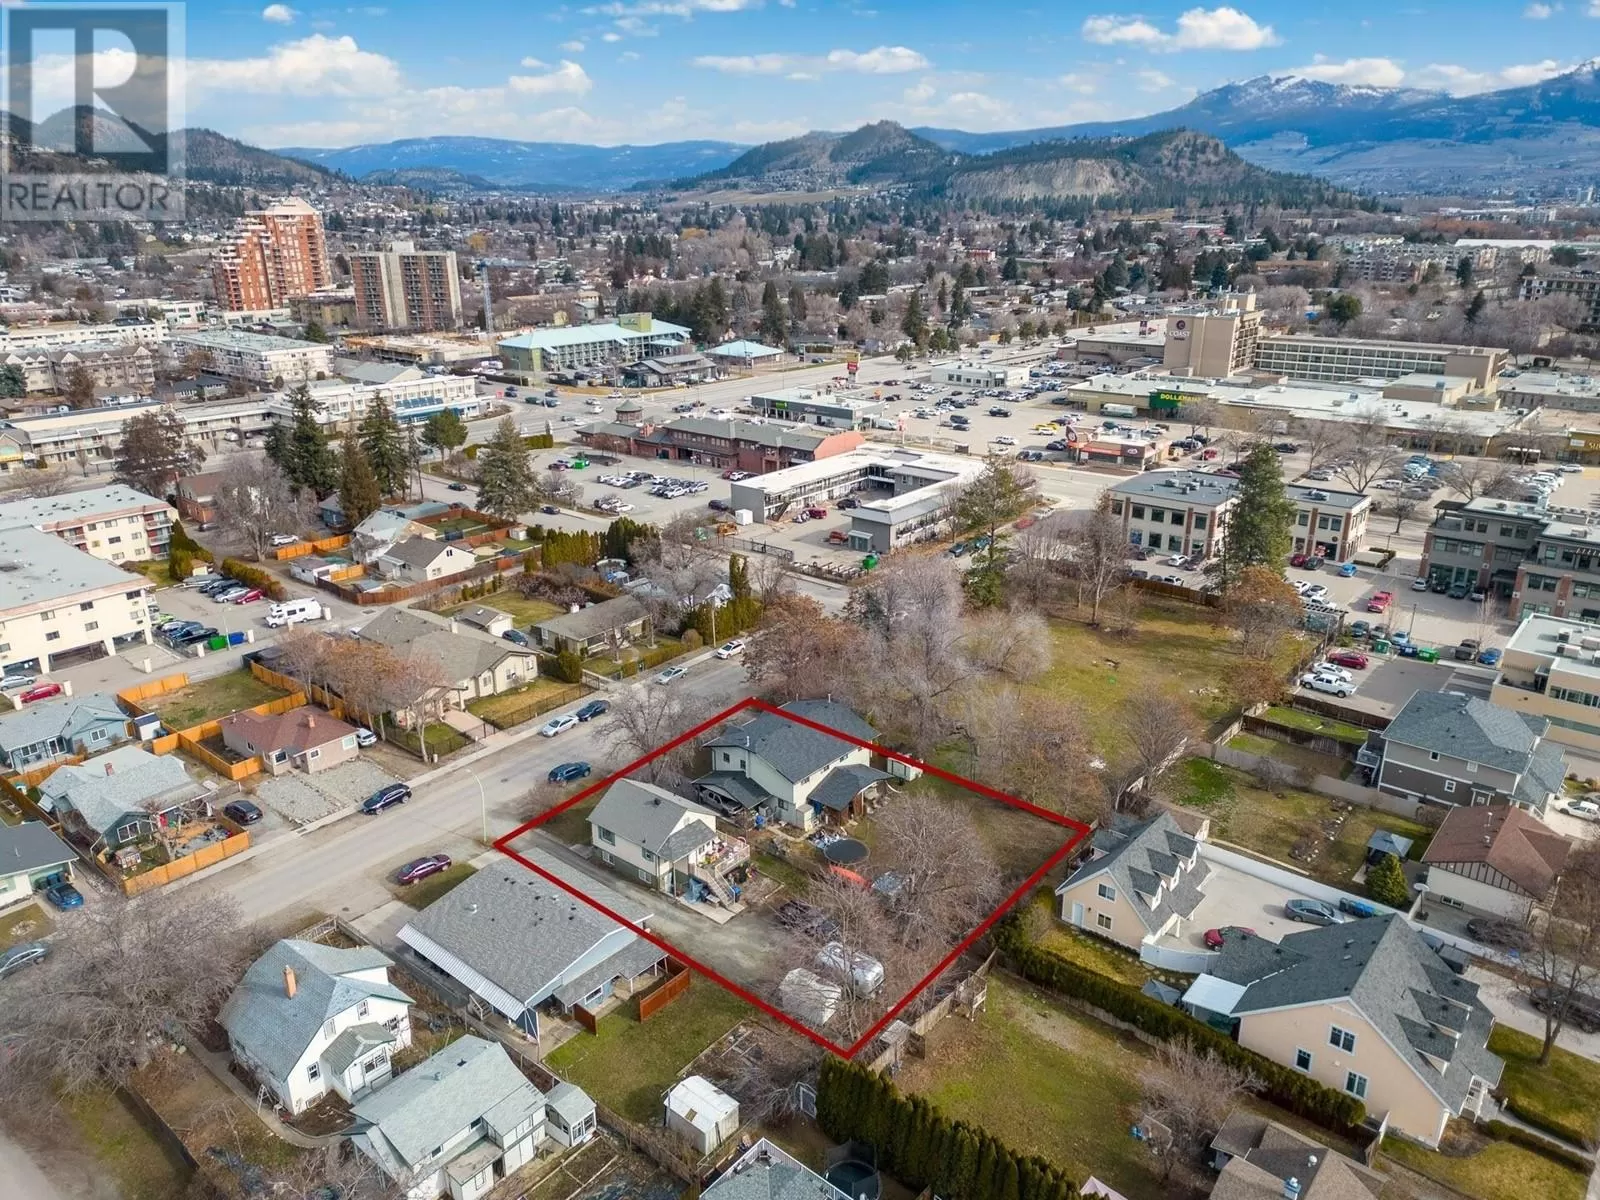 Residential Commercial Mix for rent: 1025 & 1033/1035 Laurier Avenue, Kelowna, British Columbia V1Y 6B2